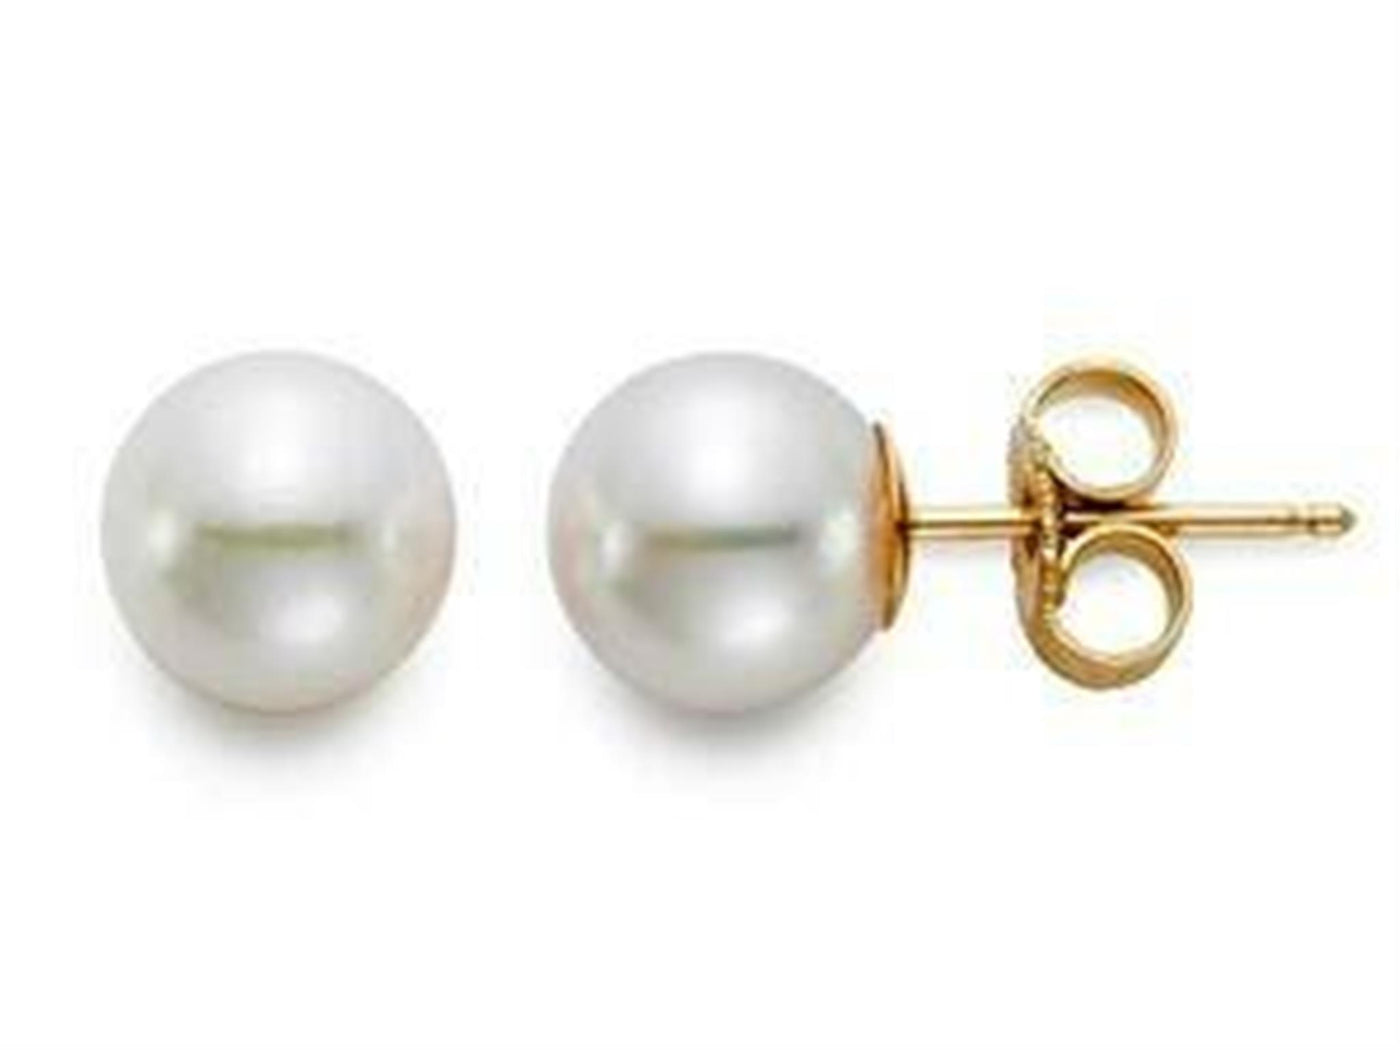 14K Yellow Gold Stud Style Earrings Featuring White Freshwater Pearls